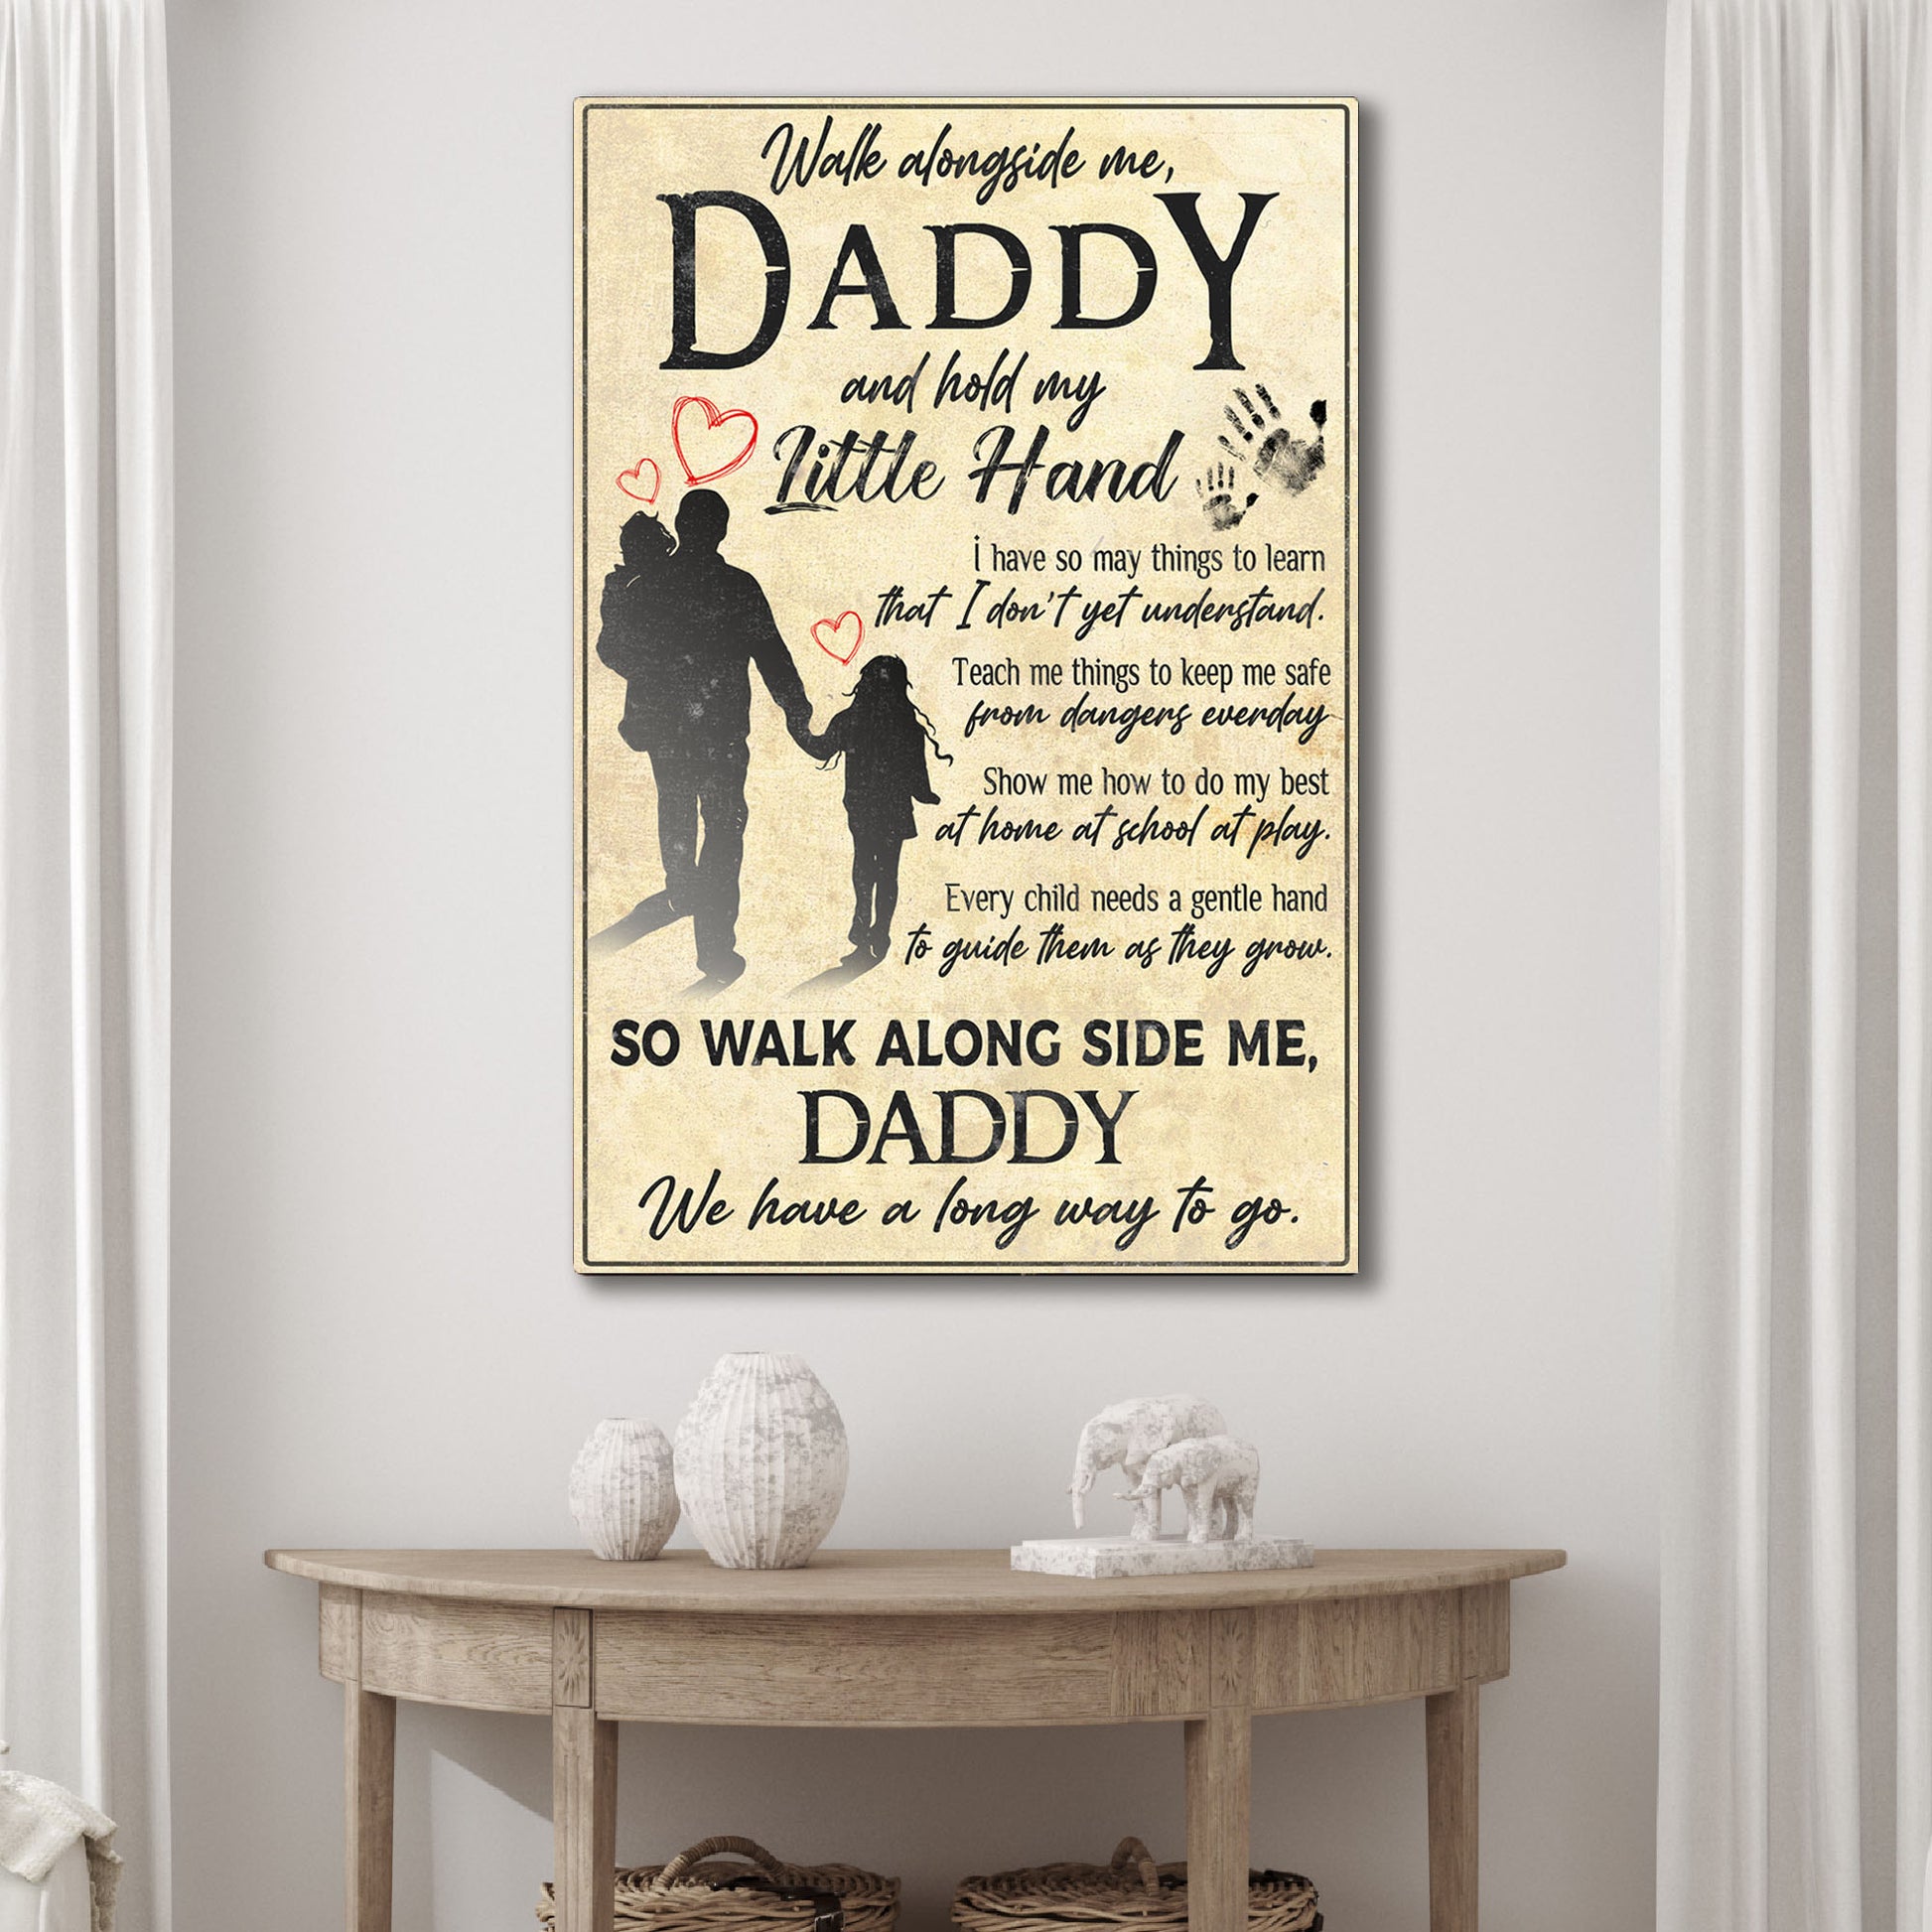 Walk Alongside Me Daddy, And Hold My Little Hand Sign Style 2 - Image by Tailored Canvases